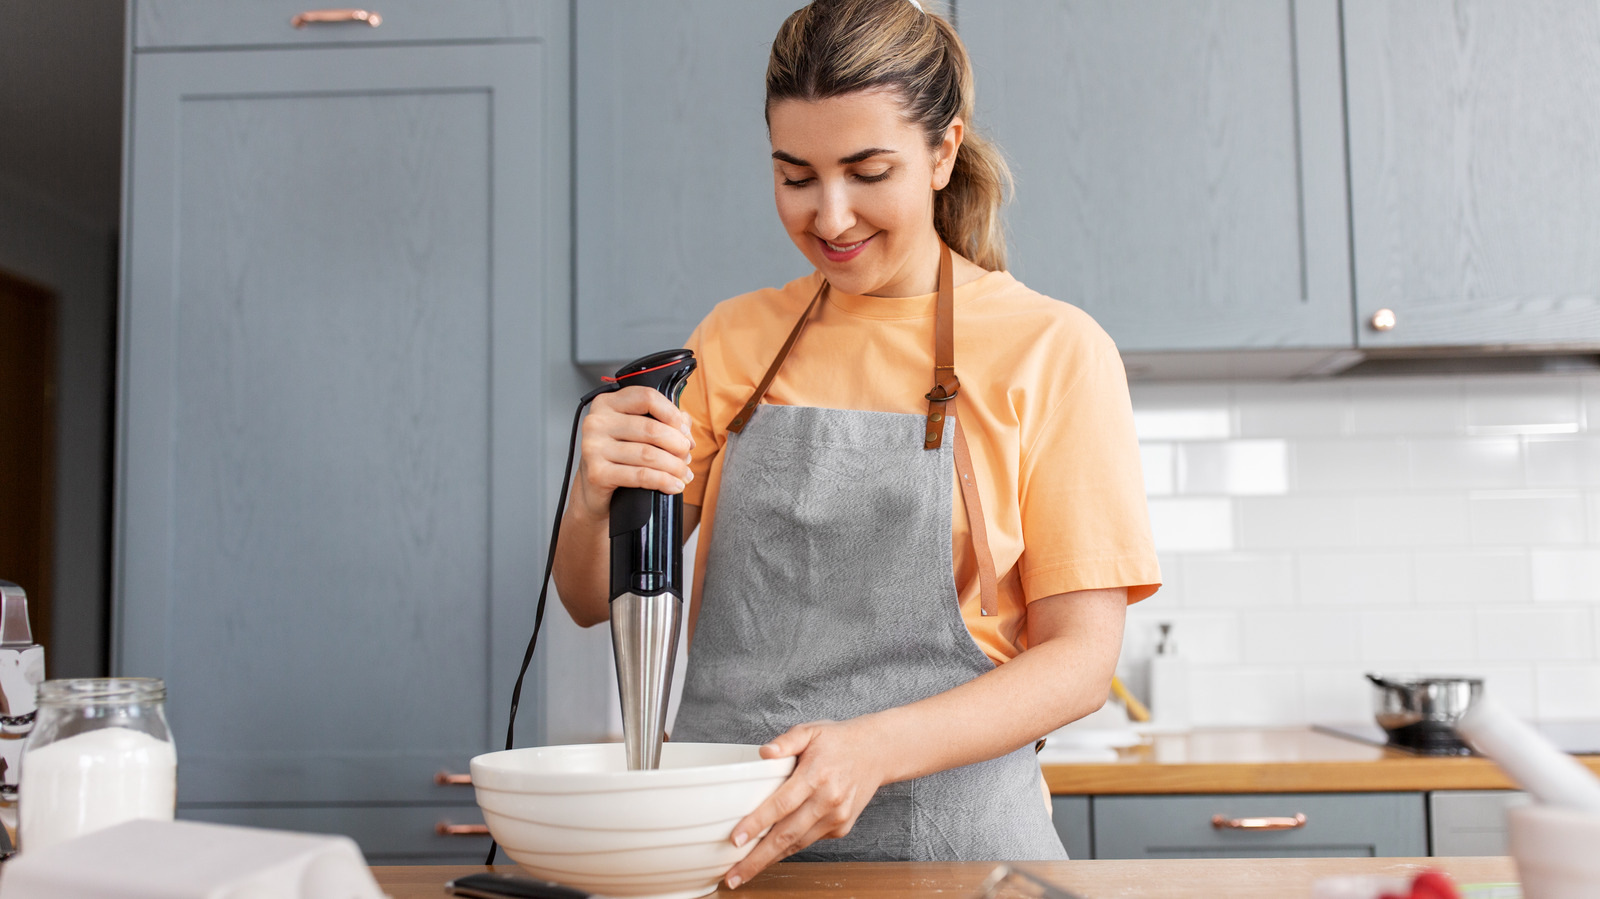 What Is an Immersion Blender? Definition and Uses